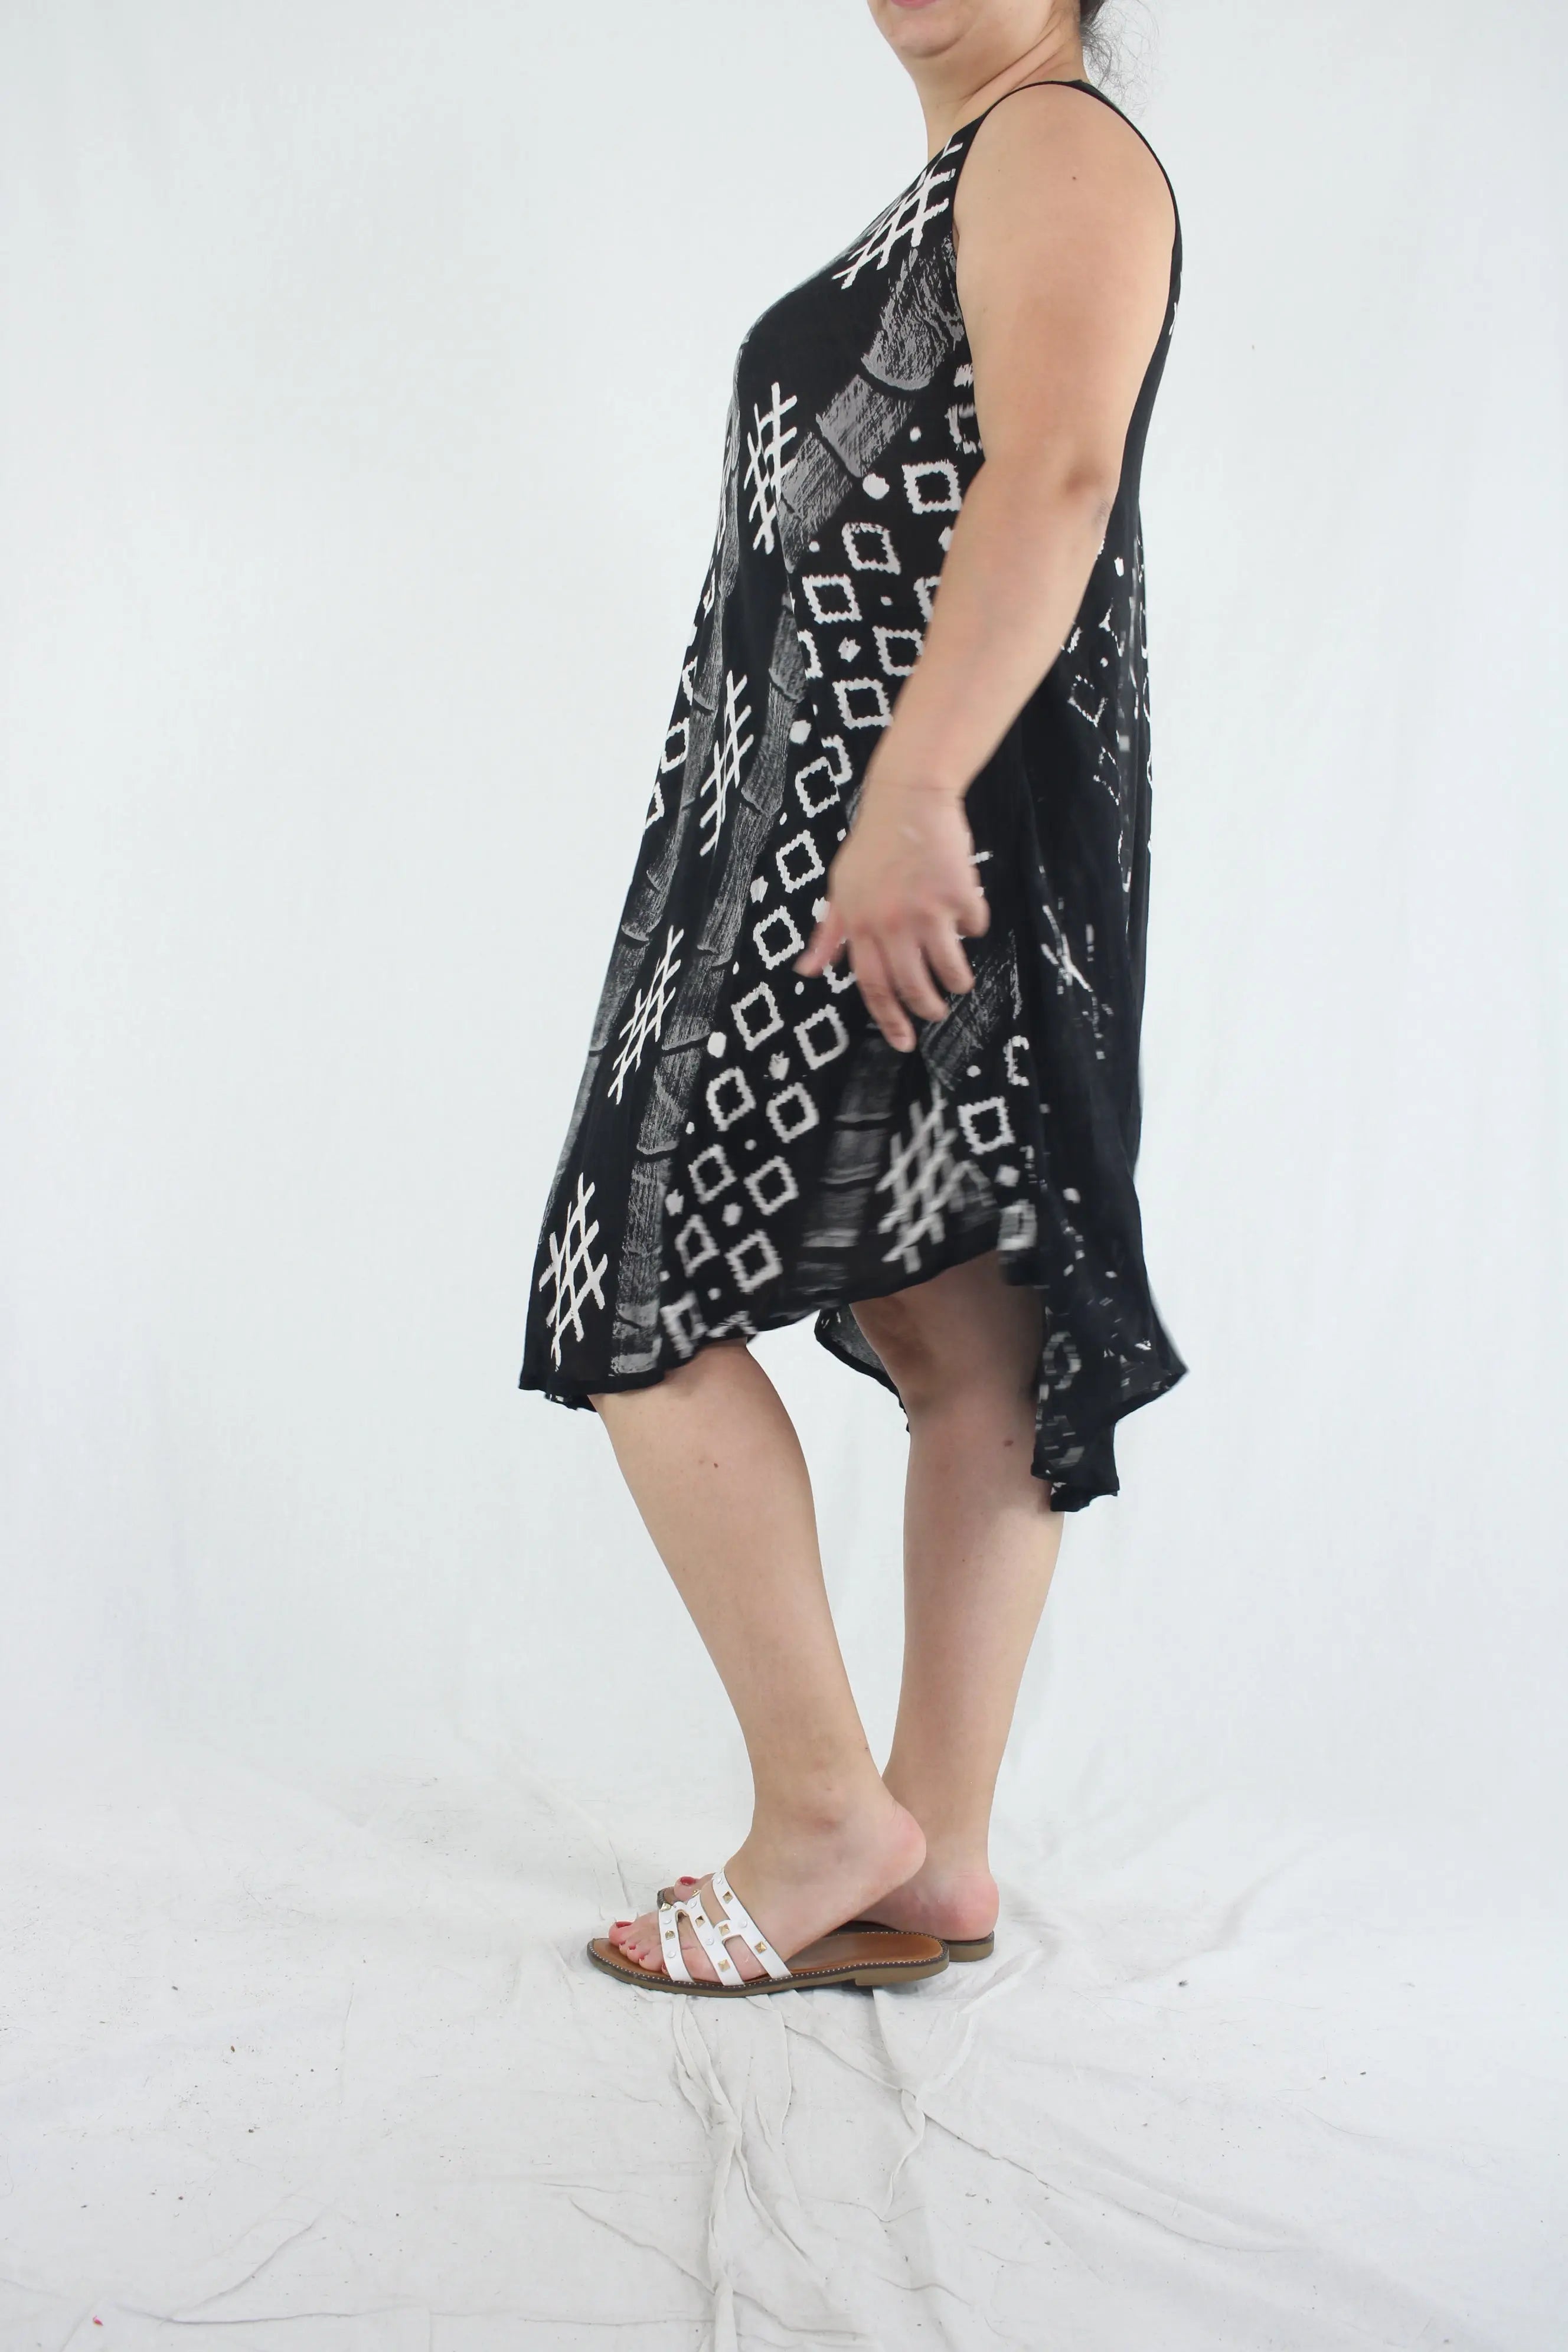 Unknown - Black Patterned Dress- ThriftTale.com - Vintage and second handclothing